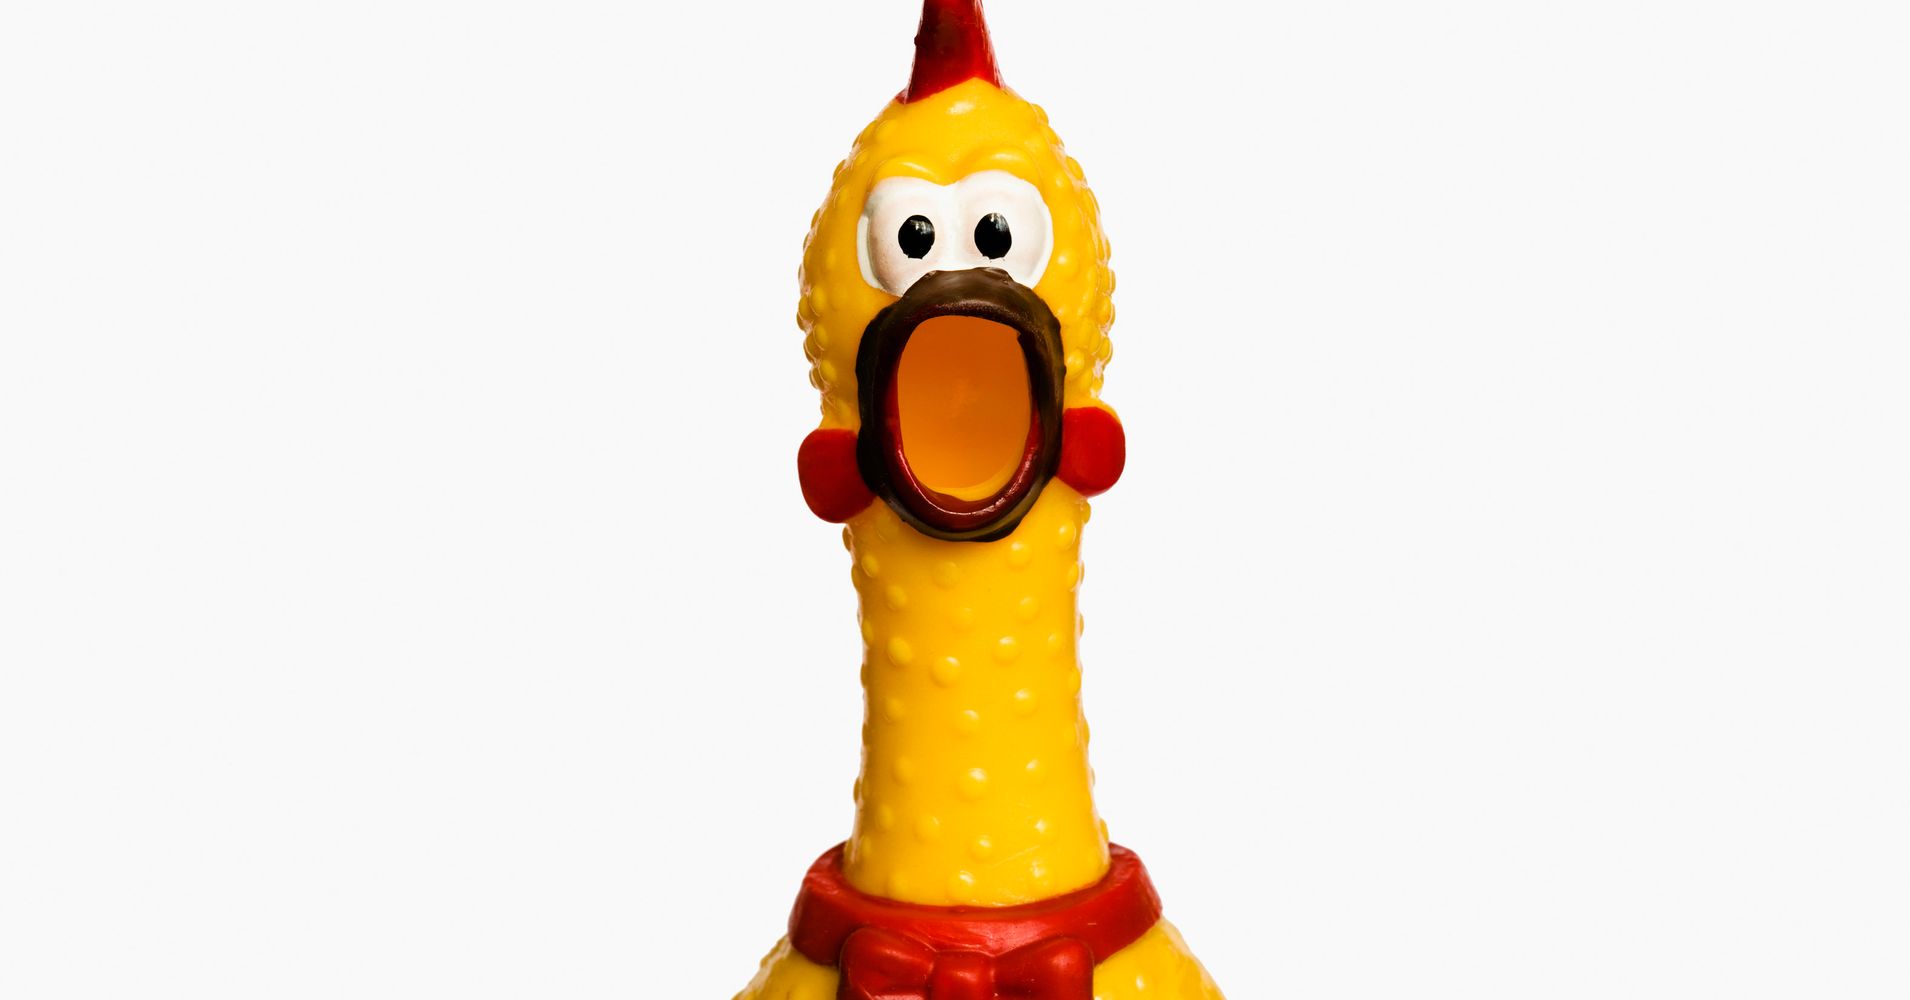 Rubber Chickens Bounce To The Beak In EDM-Style Banger | HuffPost1910 x 1000